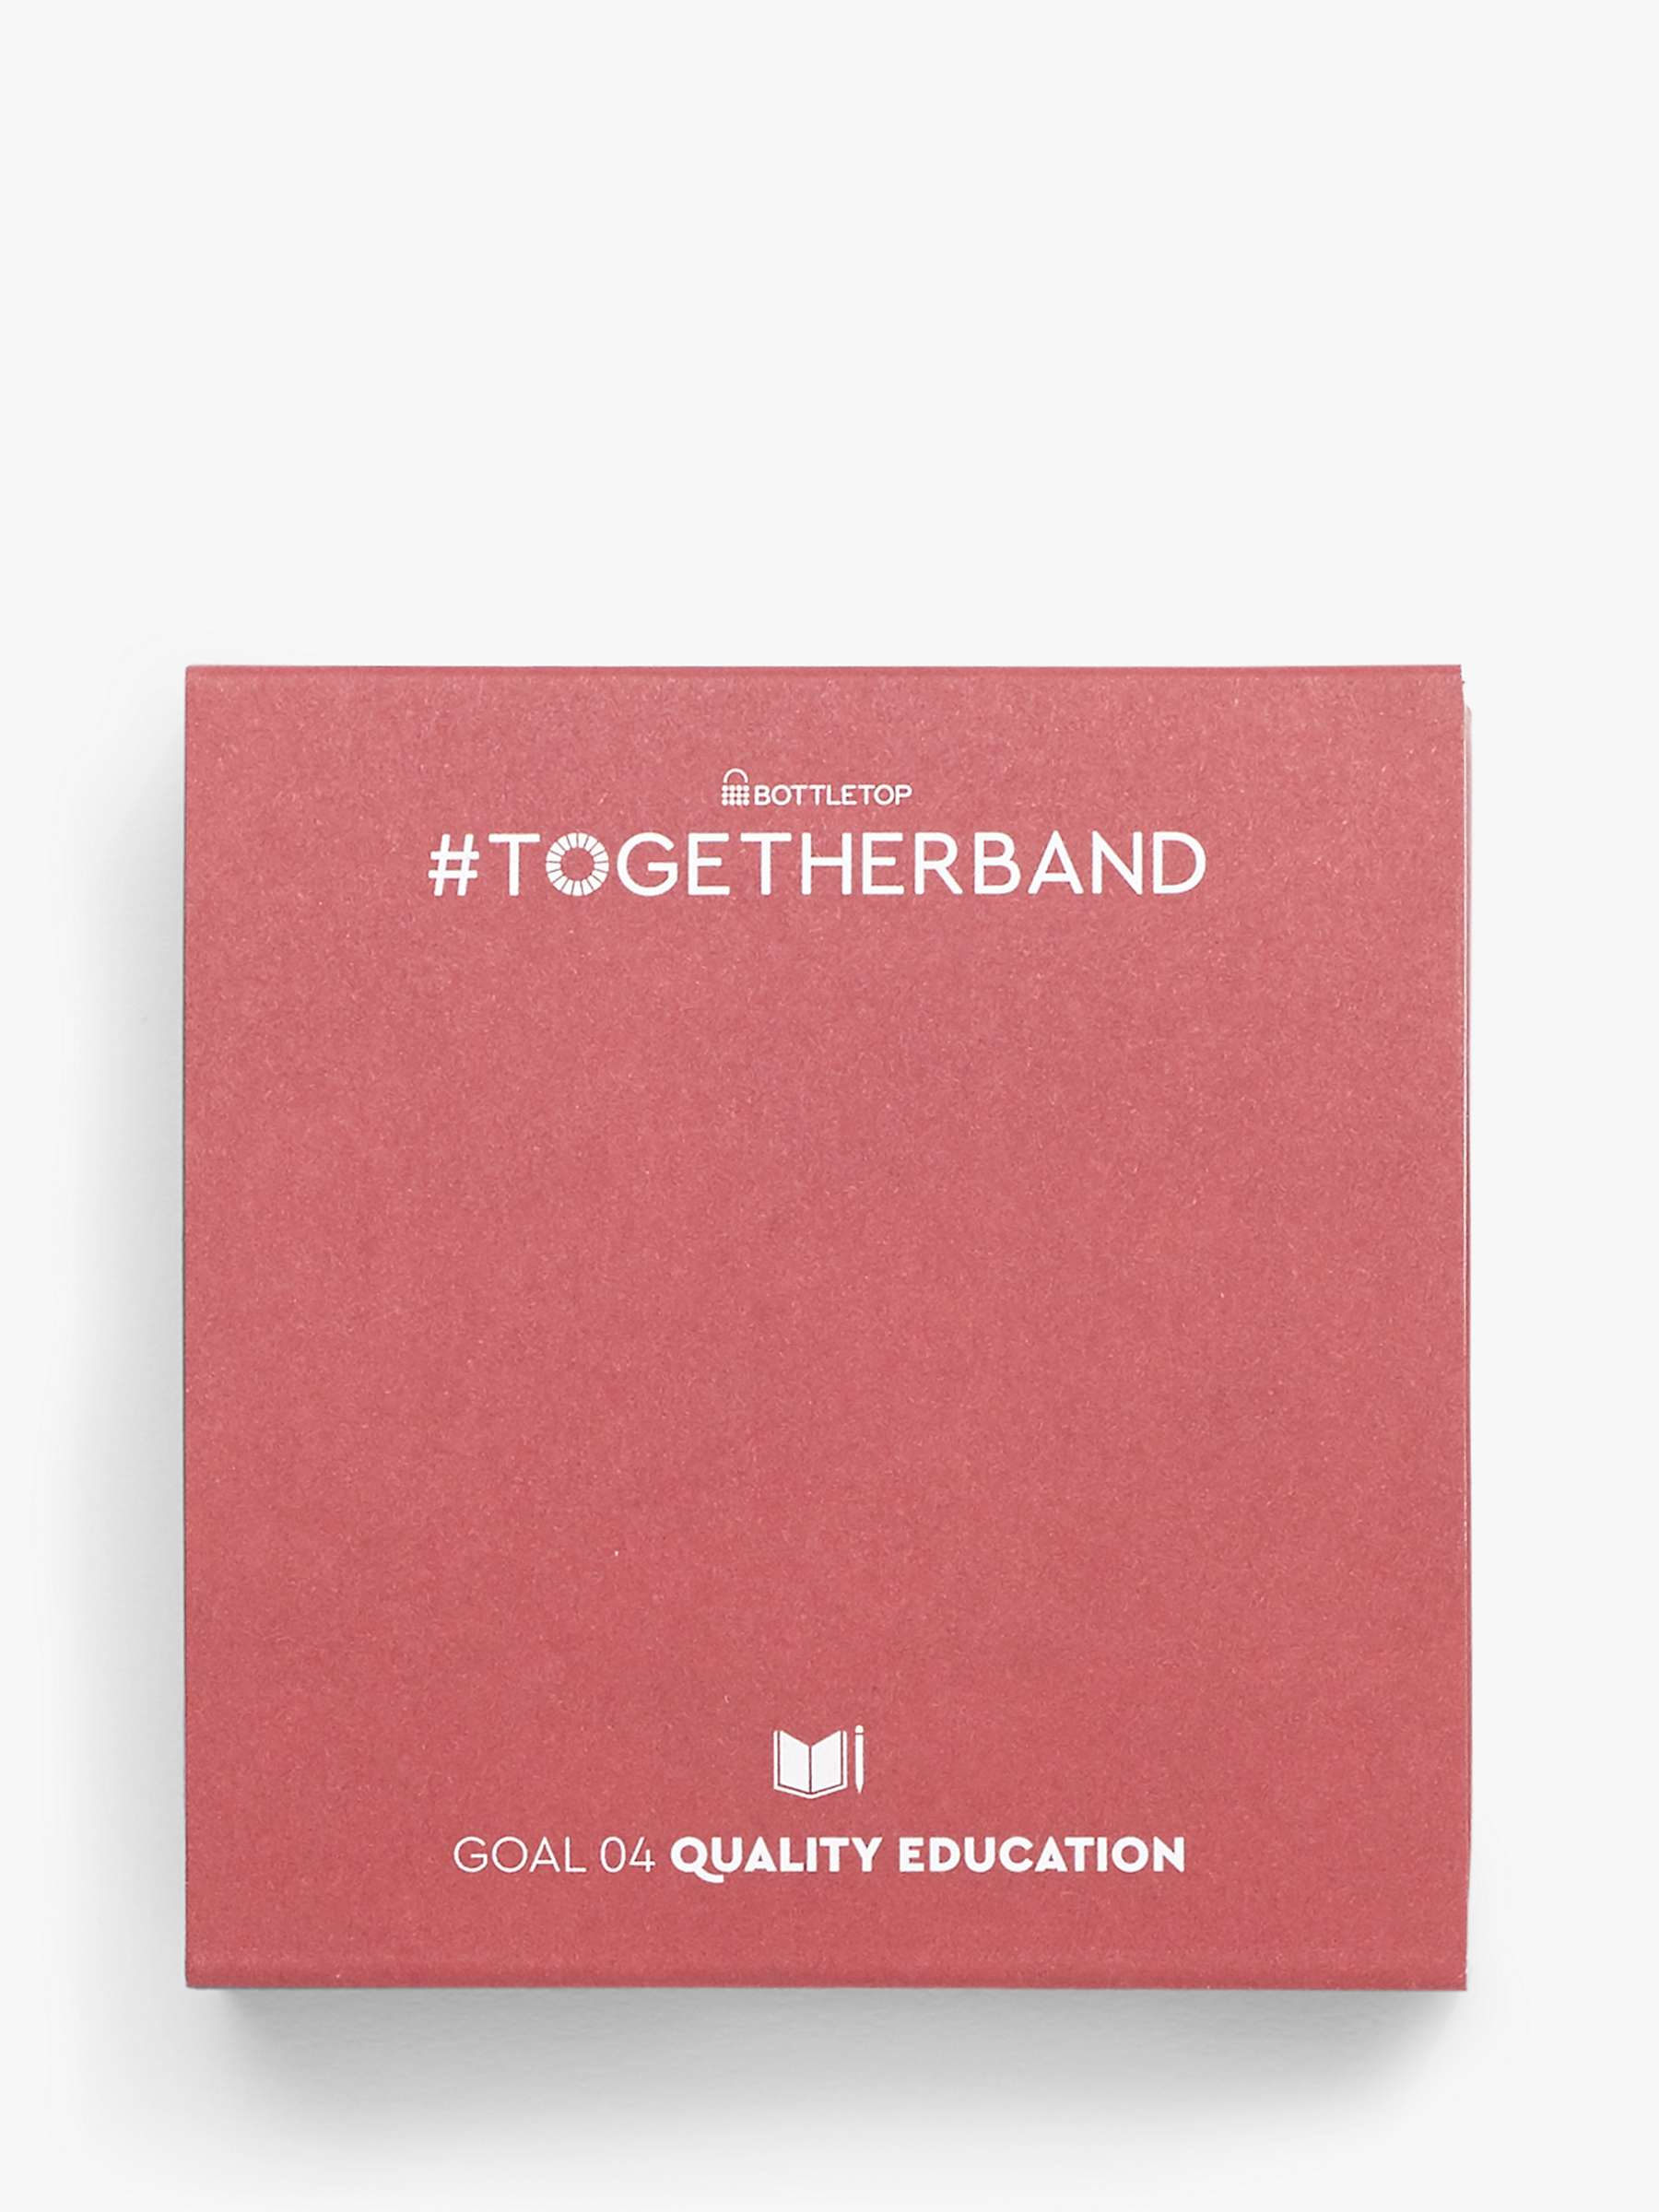 Buy #TOGETHERBAND UN Goal 4 - Quality Education Recycled Plastic Classic Bracelet, Pack of 2, Dark Red Online at johnlewis.com